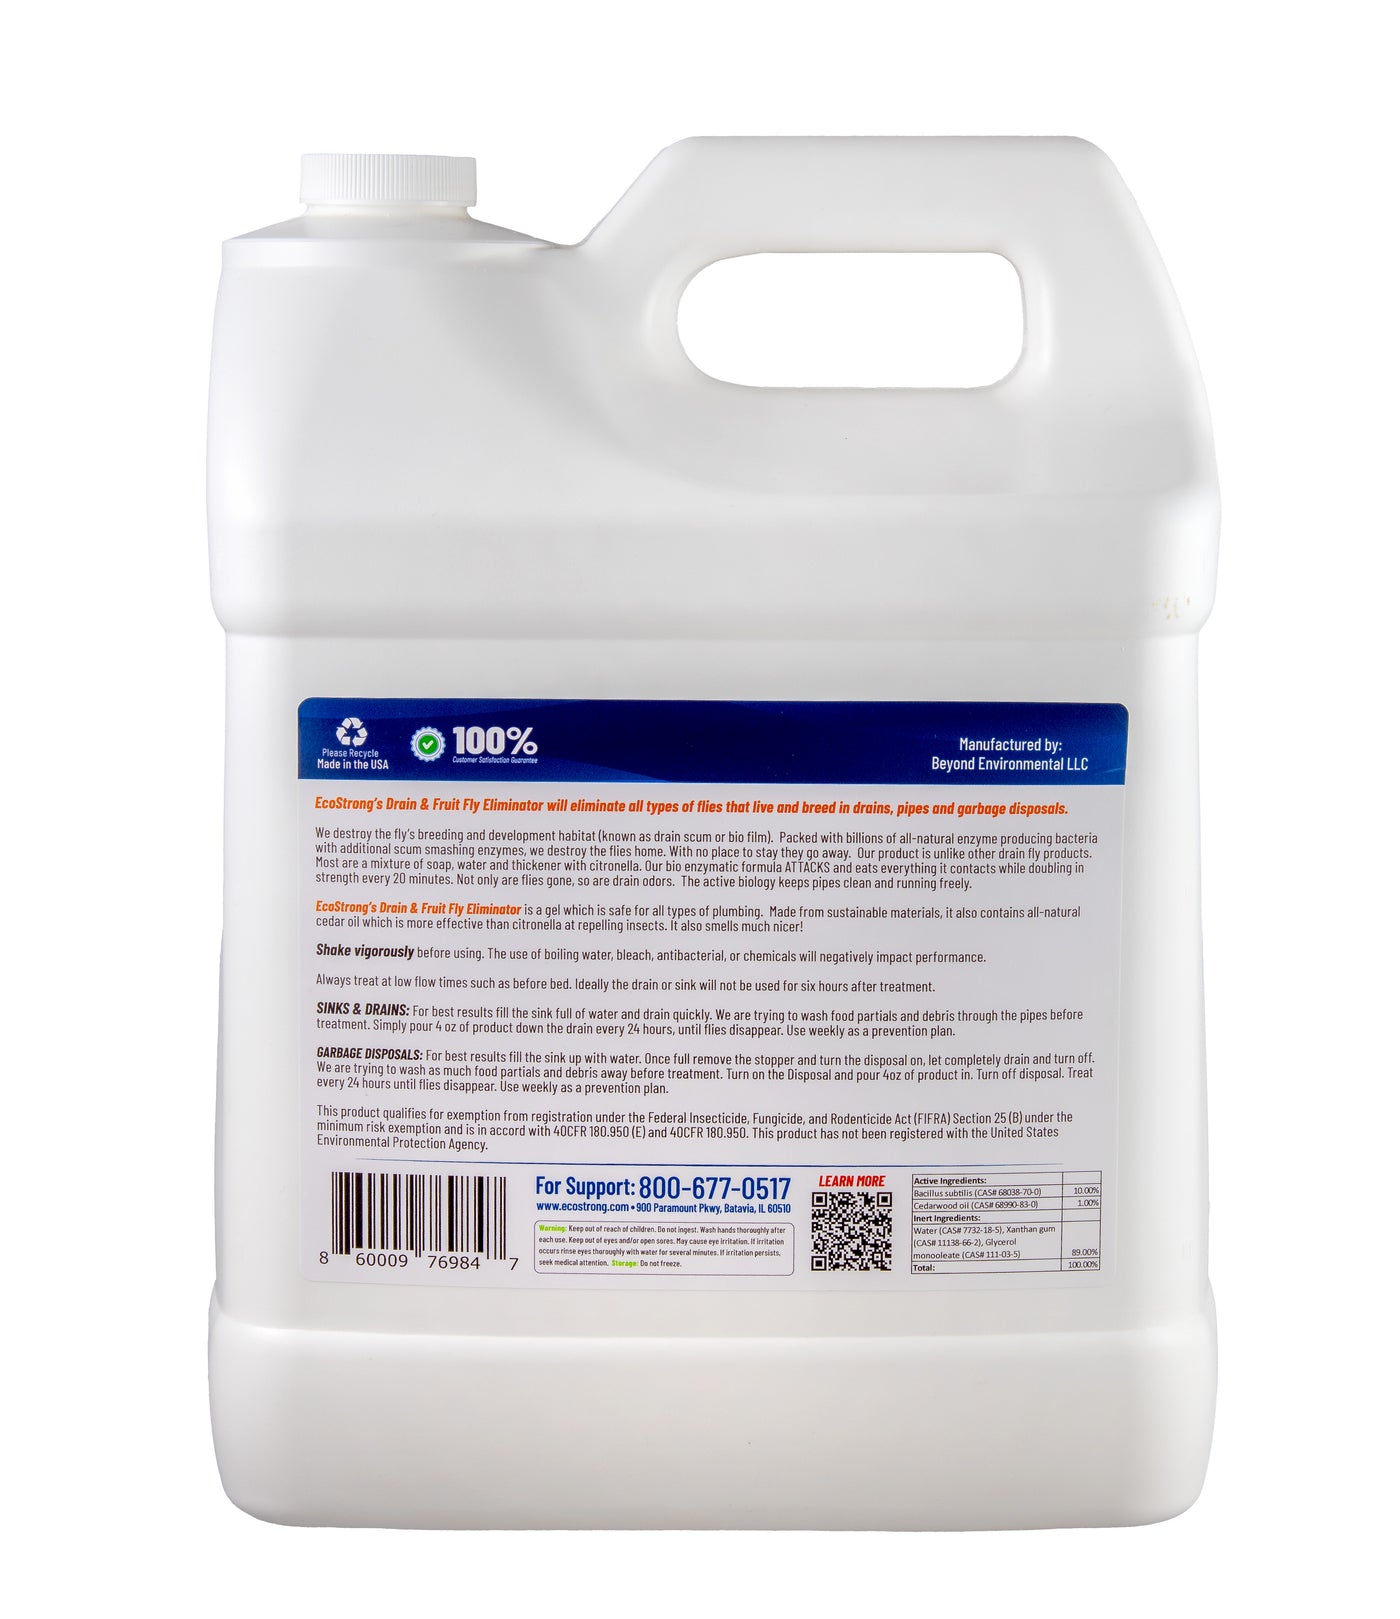 EcoStrong Drain and Fruit Fly Eliminator 1 Gallon #size_2-gallon-jug